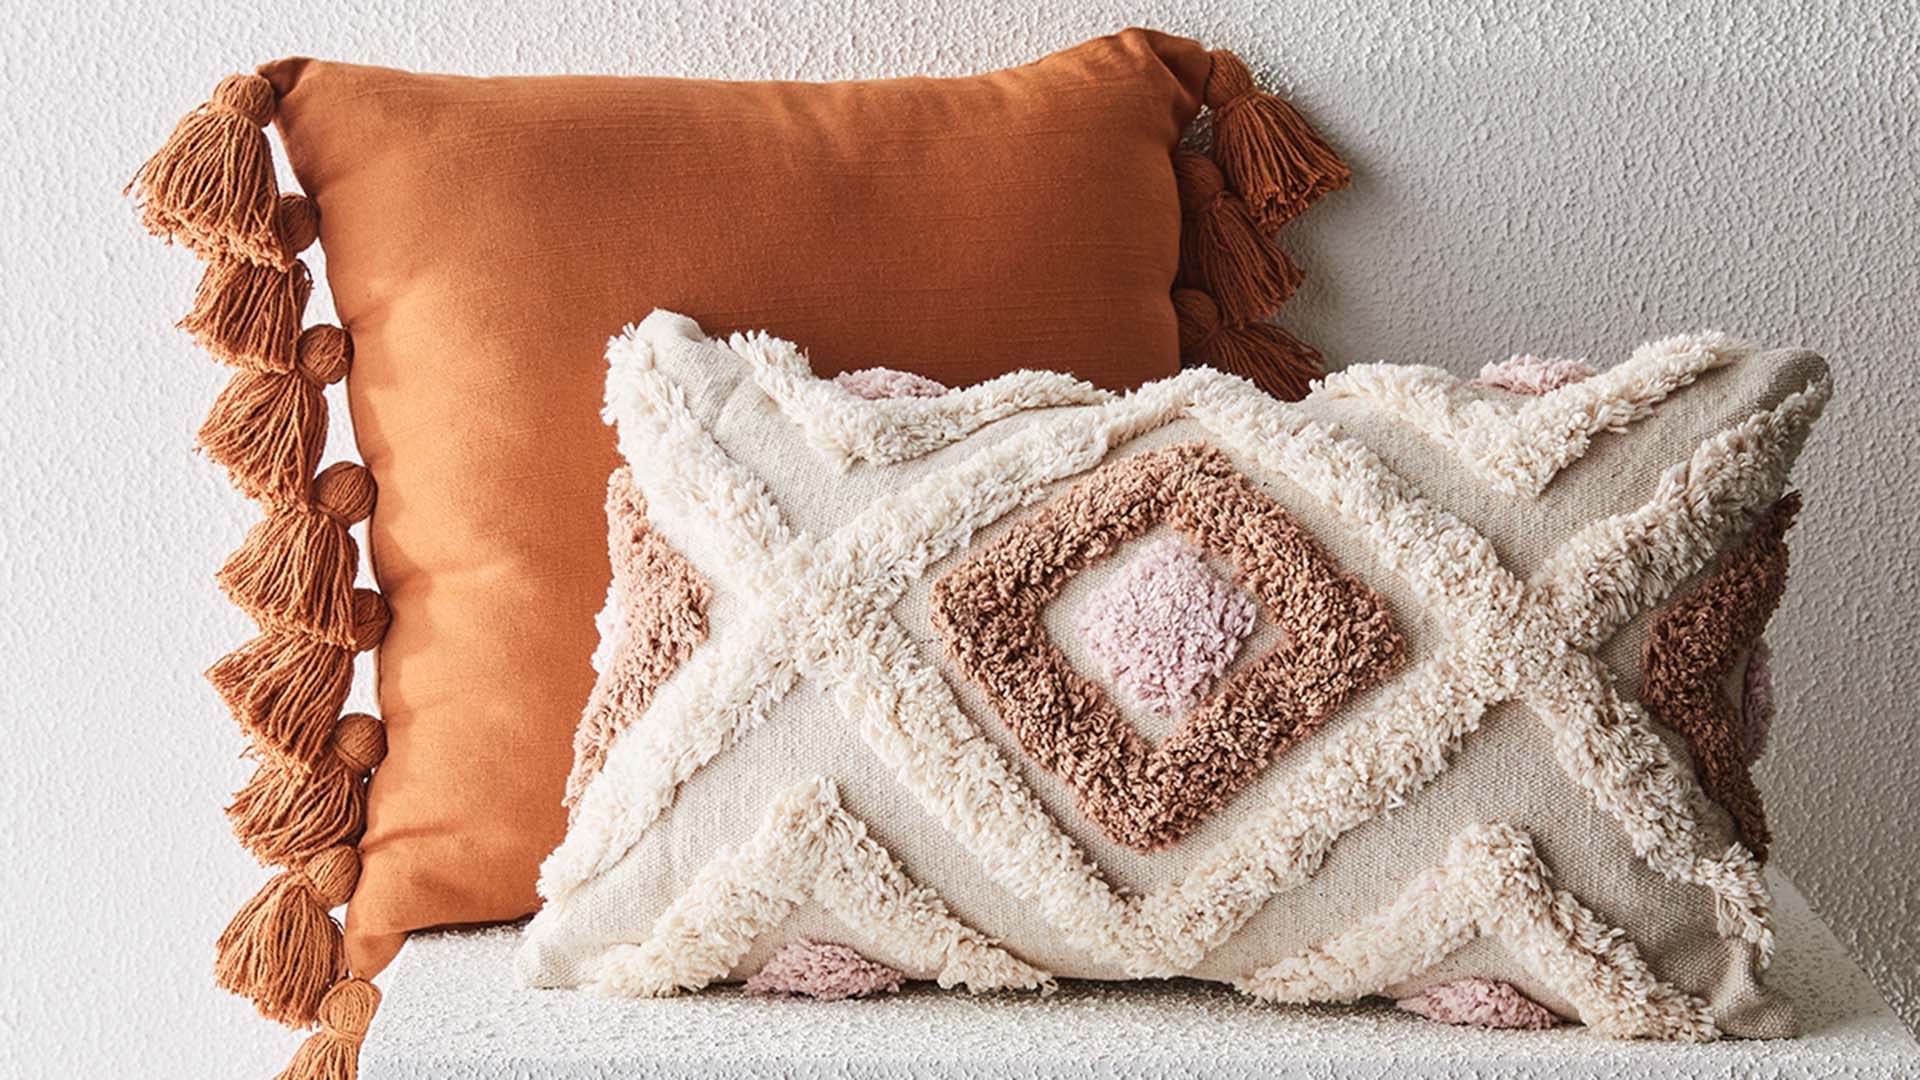 Kmart Has Unveiled All the New Boho and Beachy Homewares You'll Want to Fill Your House With ASAP